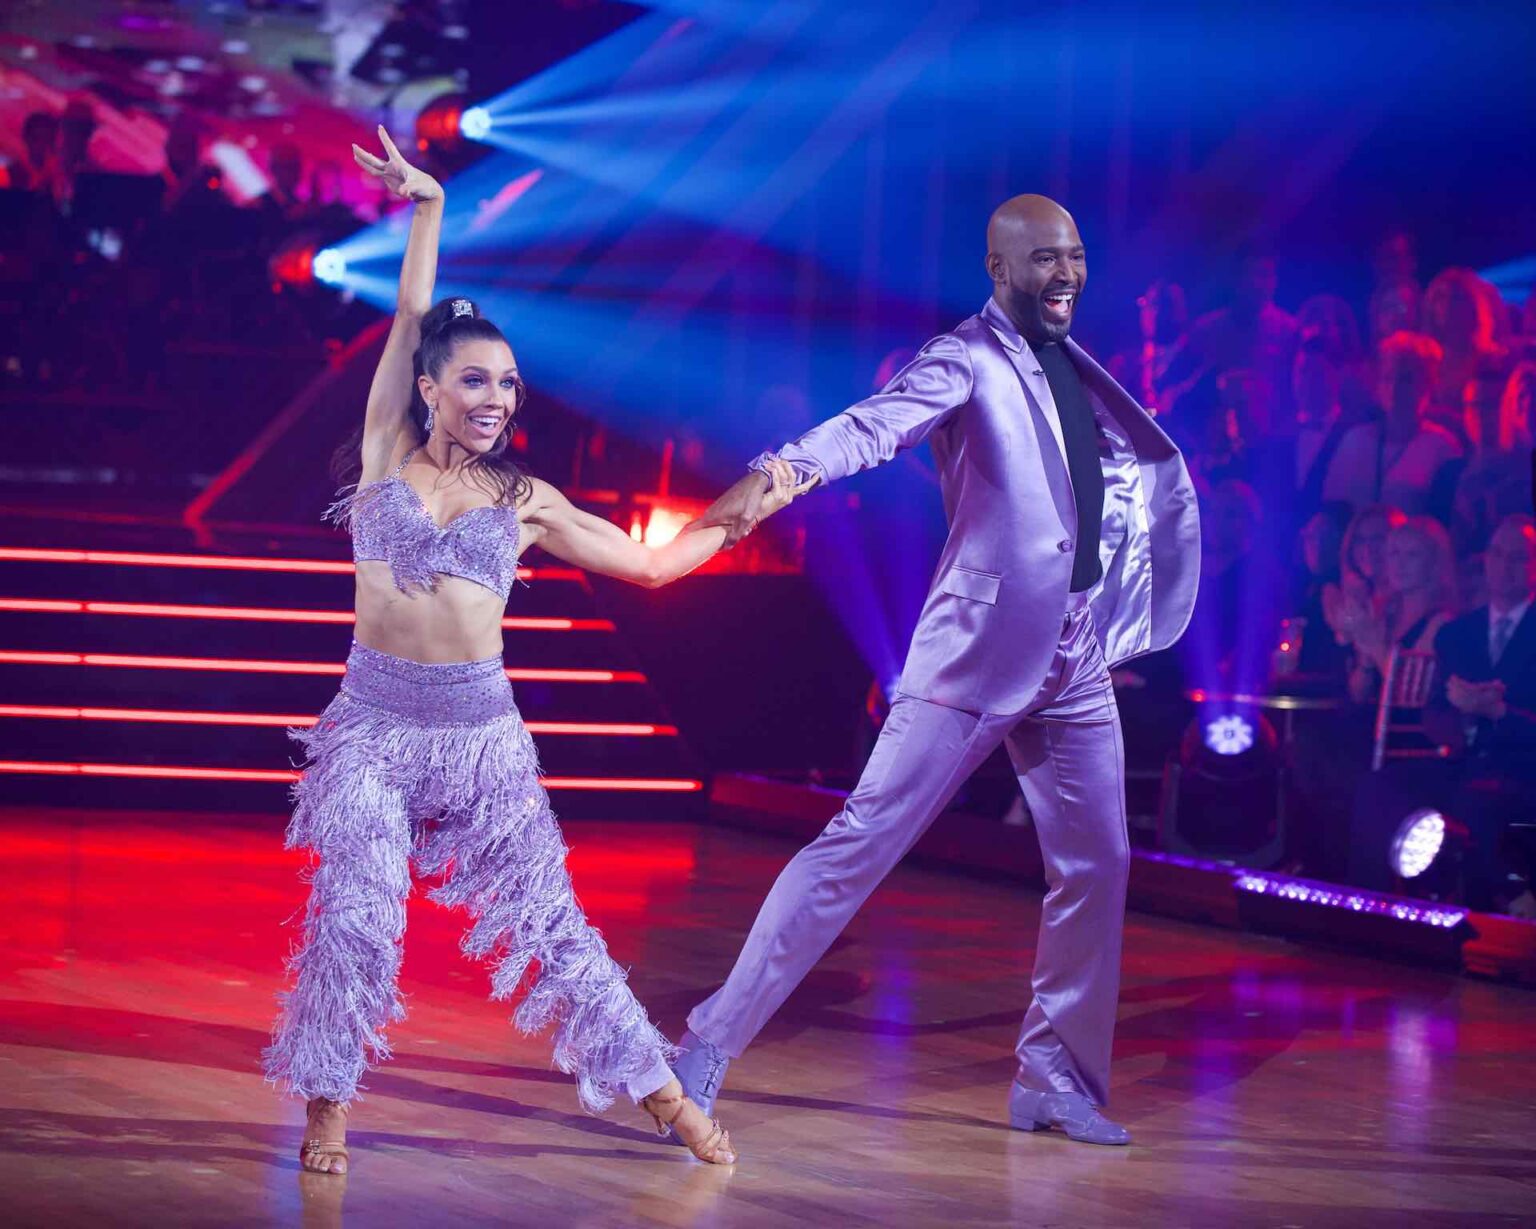 Why is Carole Baskin going on 'Dancing With The Stars'? Learn about her reasons for appearing on the show, including her husband.